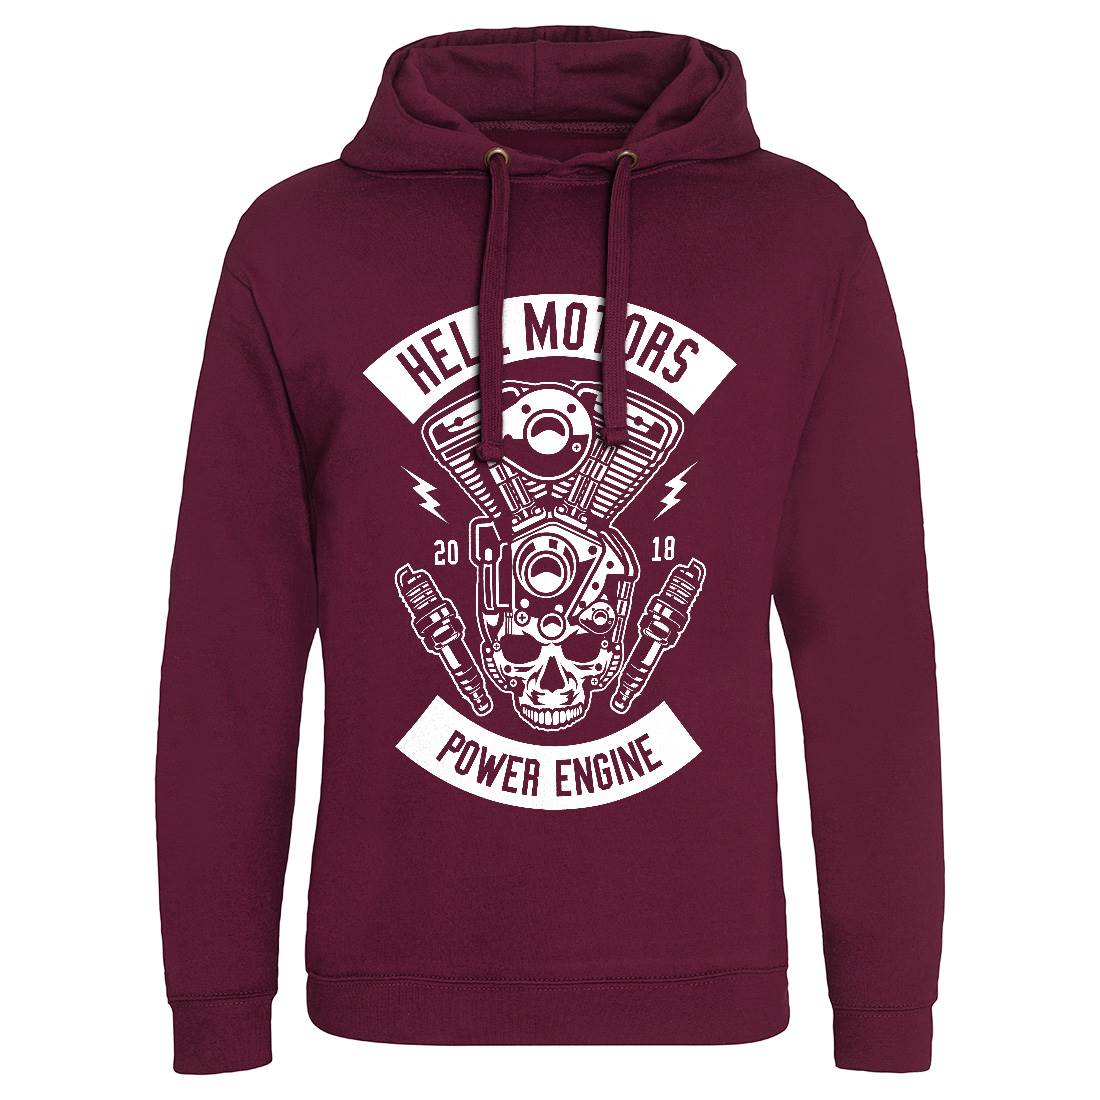 Hell Motors Mens Hoodie Without Pocket Motorcycles B554